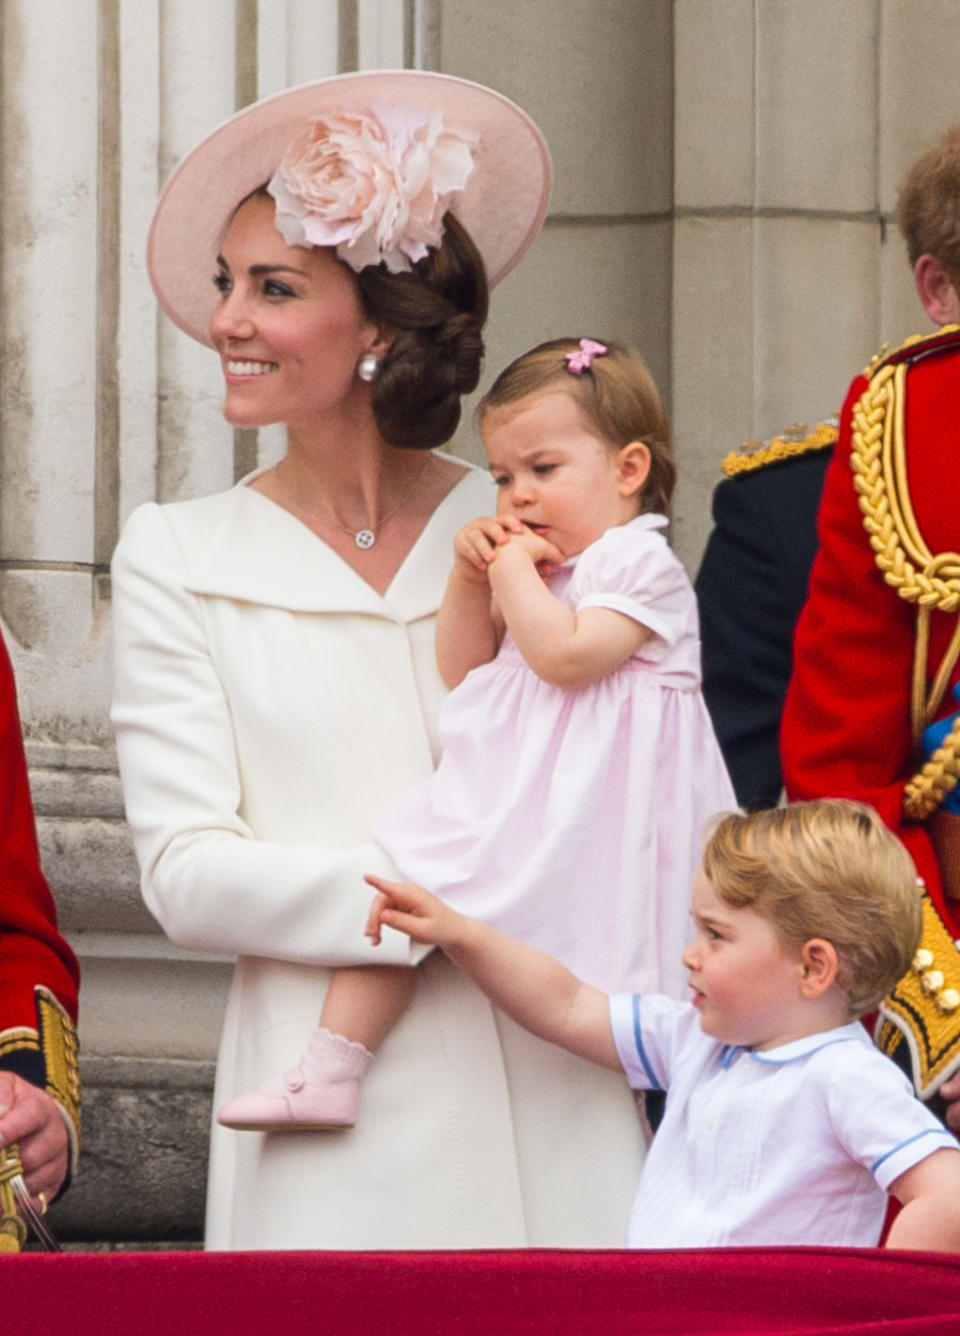 <p>The Duchess recycled her Alexander McQueen outfit from Princess Charlotte’s christening for an appearance on the balcony at the Queen’s 90th birthday celebration. A pale pink hat by Philip Treacy and pearl Balenciaga earrings completed the look. </p><p><i>[Photo: PA]</i></p>